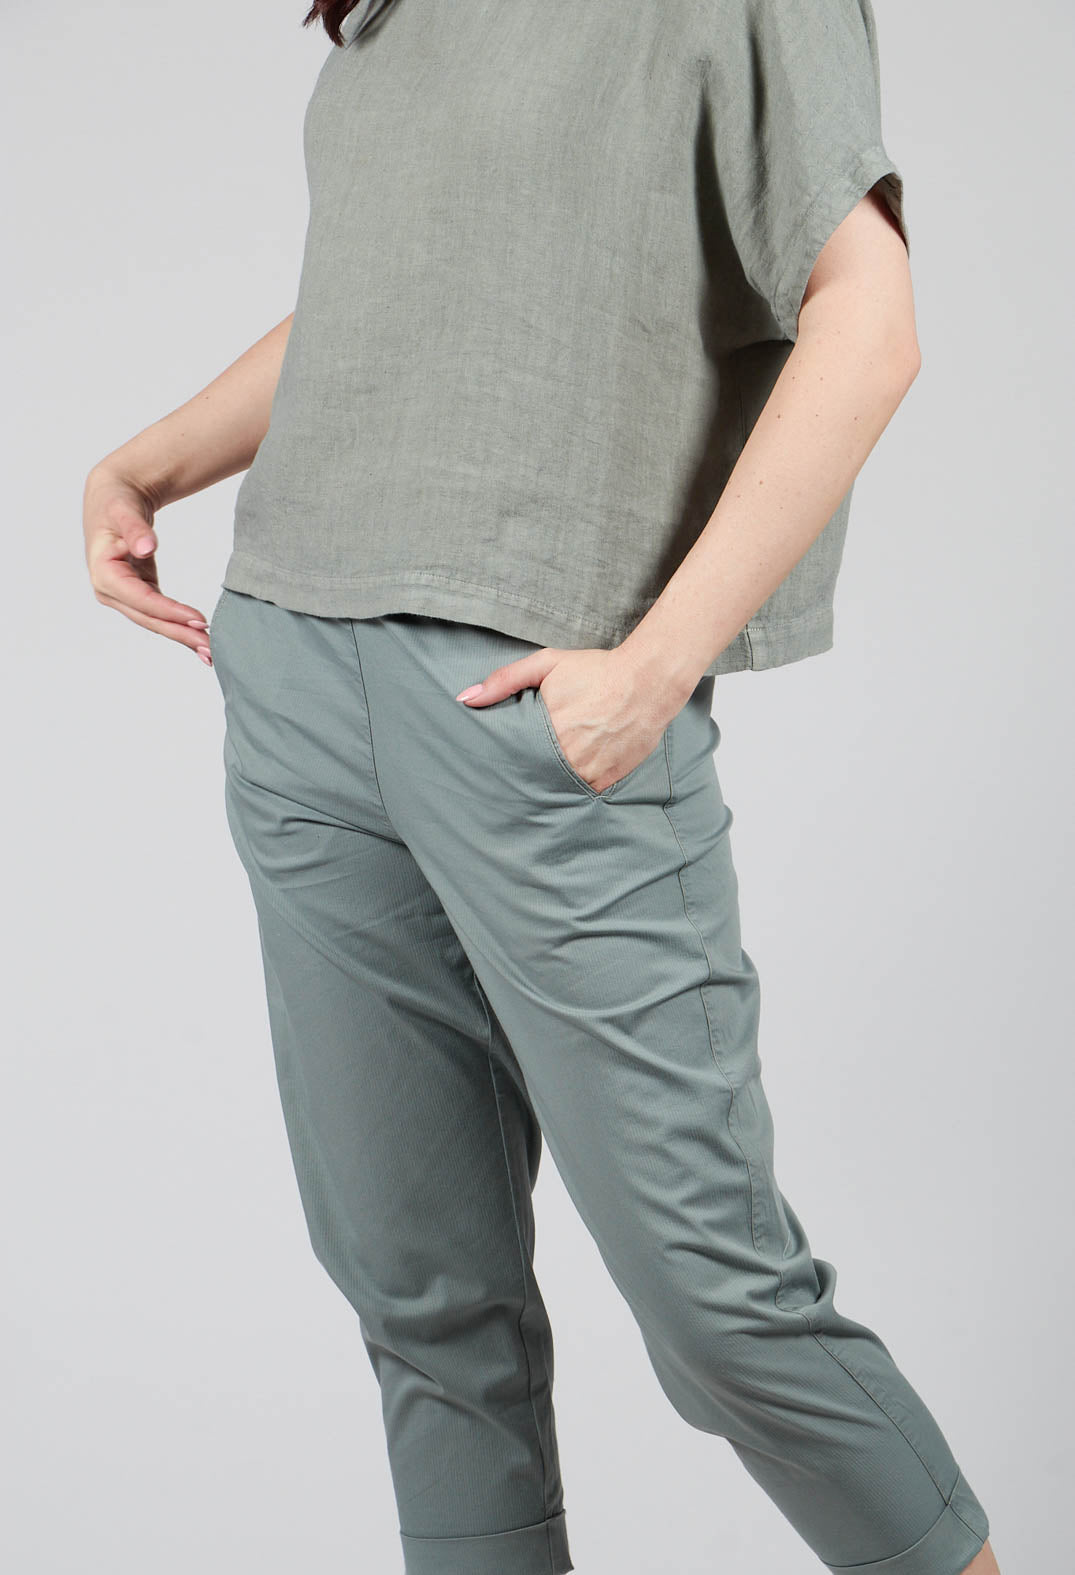 Relaxed Geisha Trousers in Eucalyptus